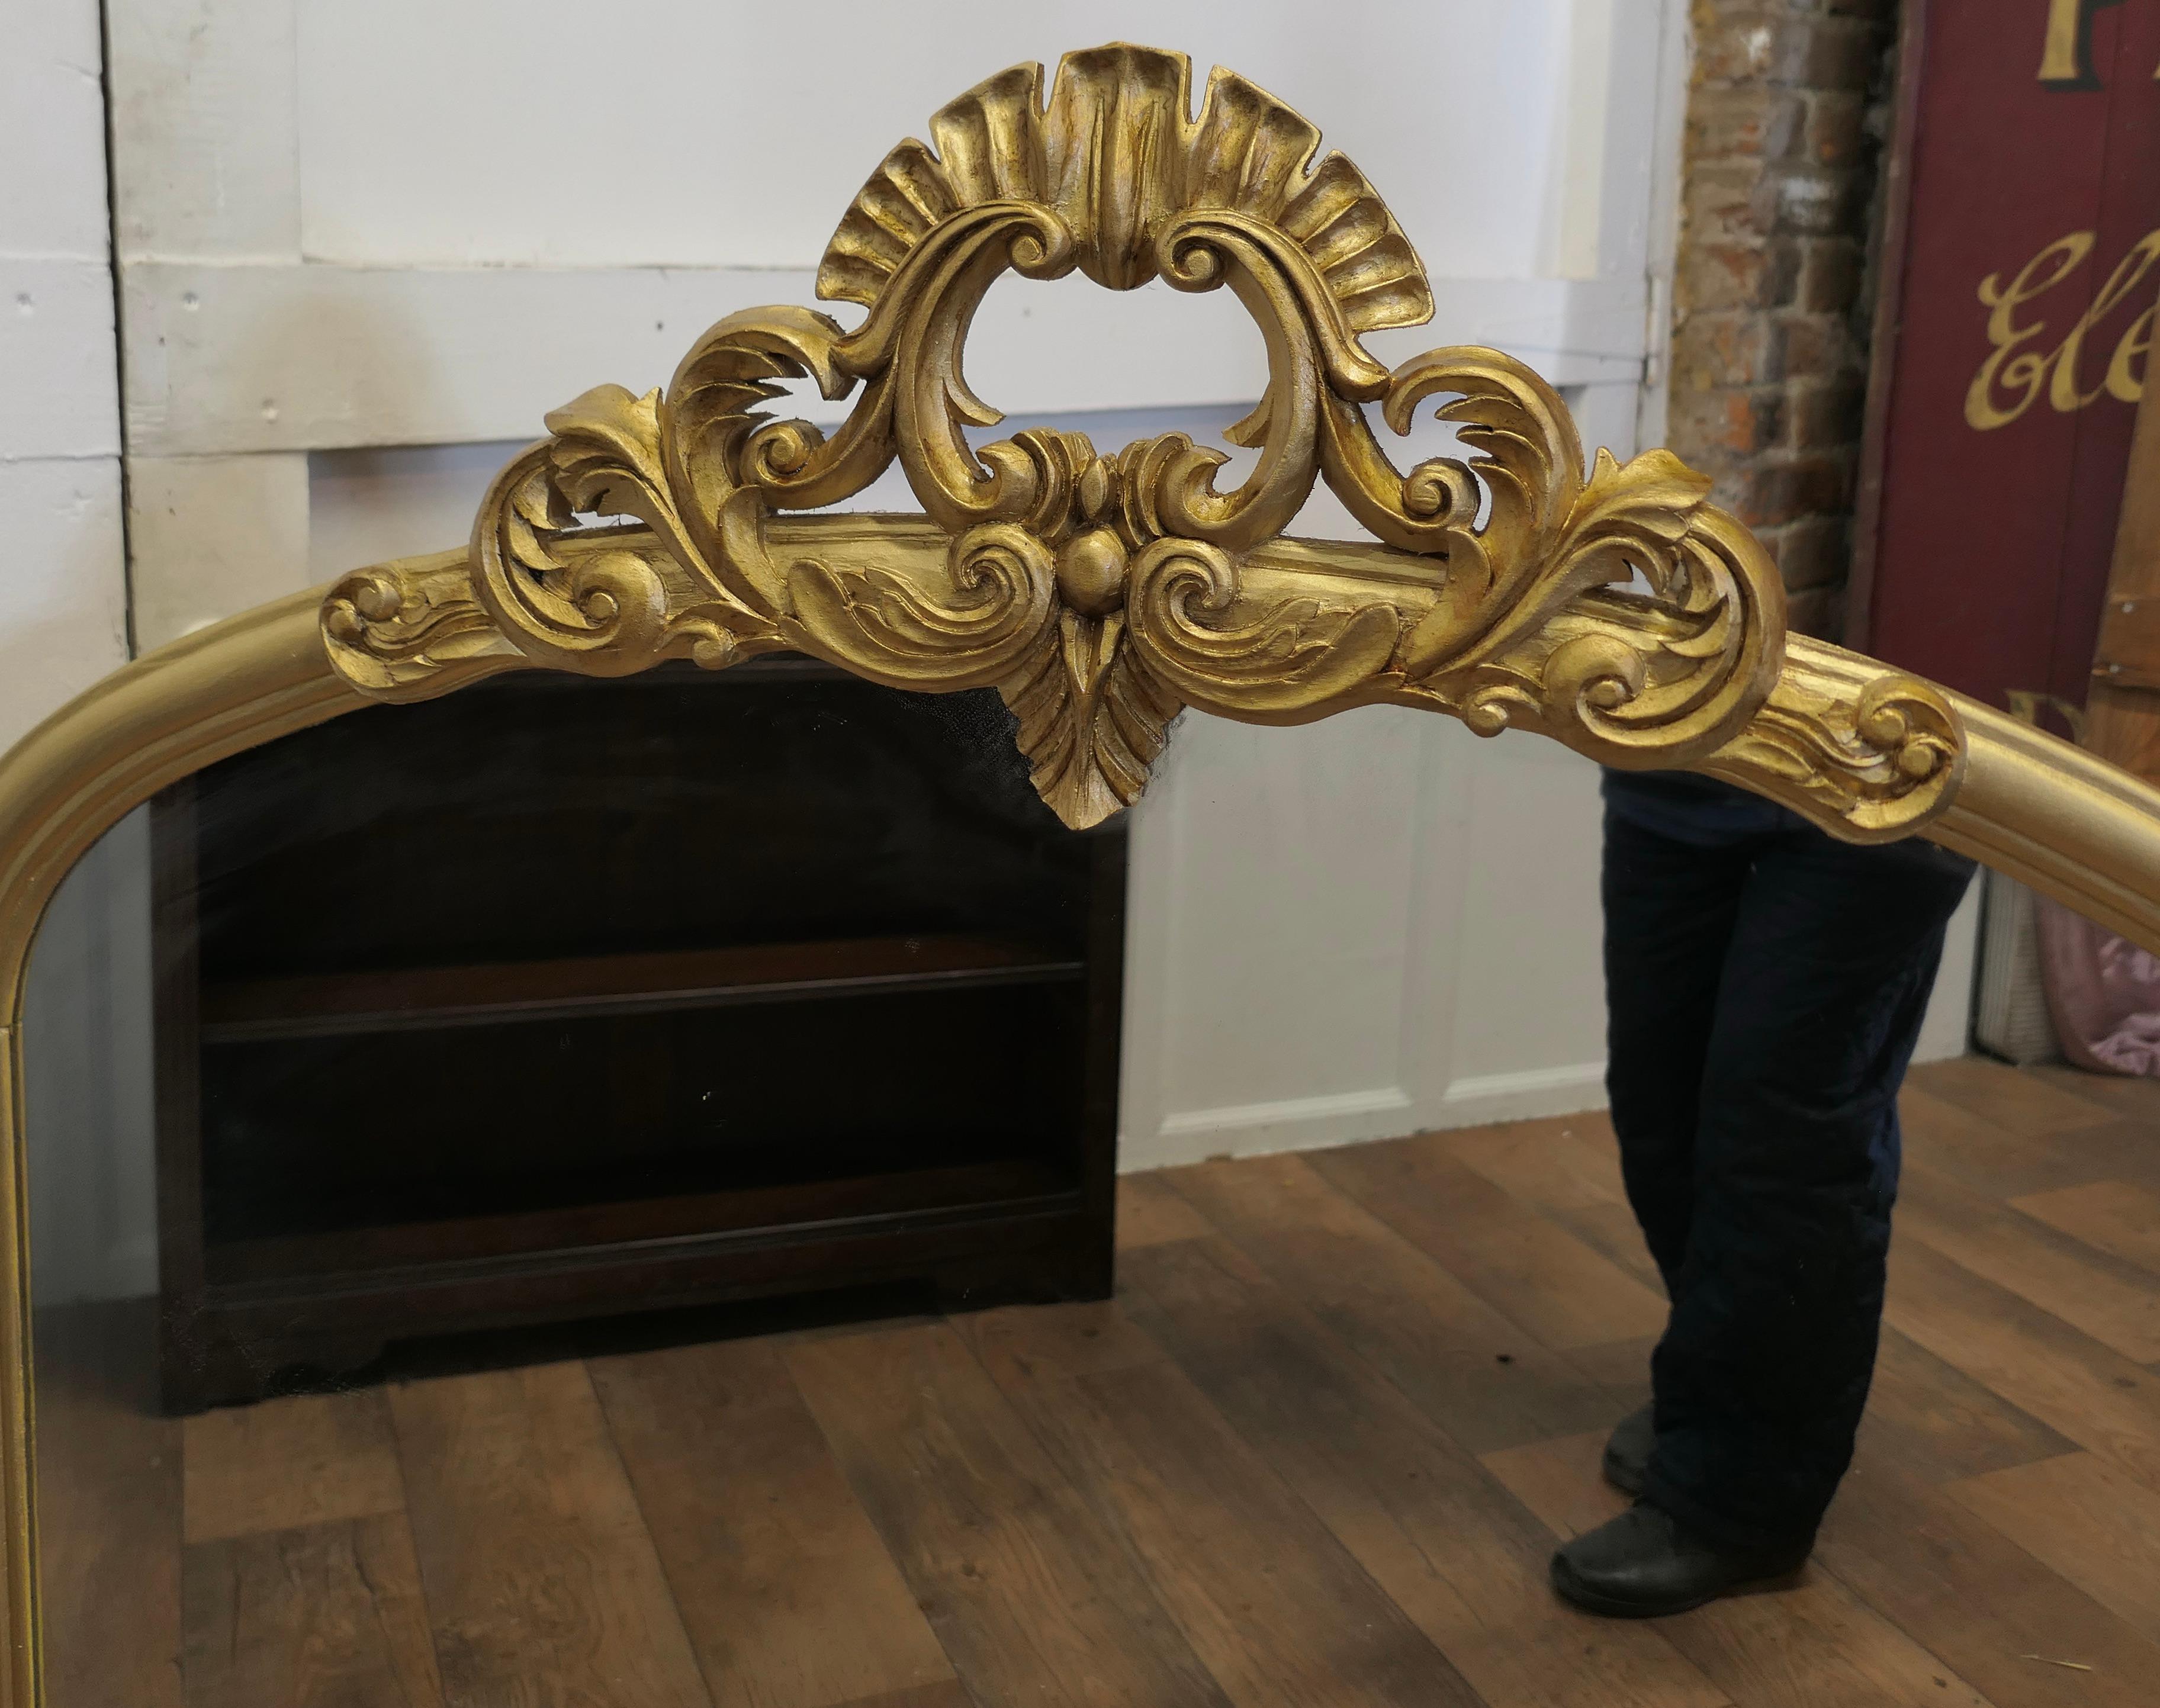 20th Century Large Gilt Rococo Style Arched Over Mantle Mirror     